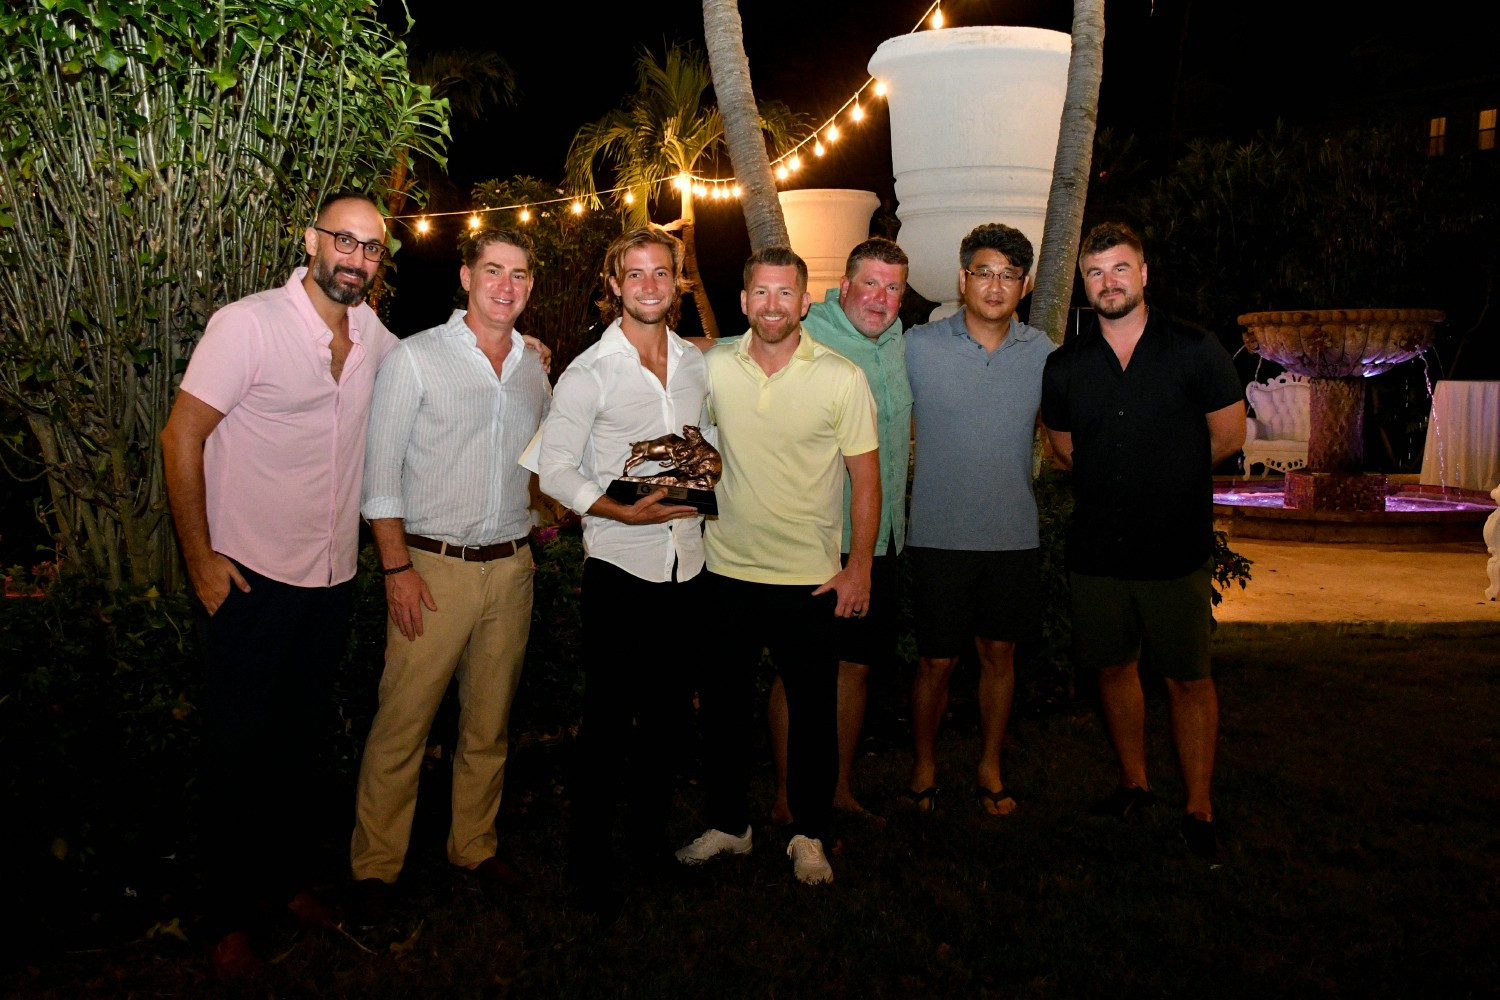 Matthew Reynolds accepting an internal Employee of the Year award from CTG leadership at company trip to the Bahamas